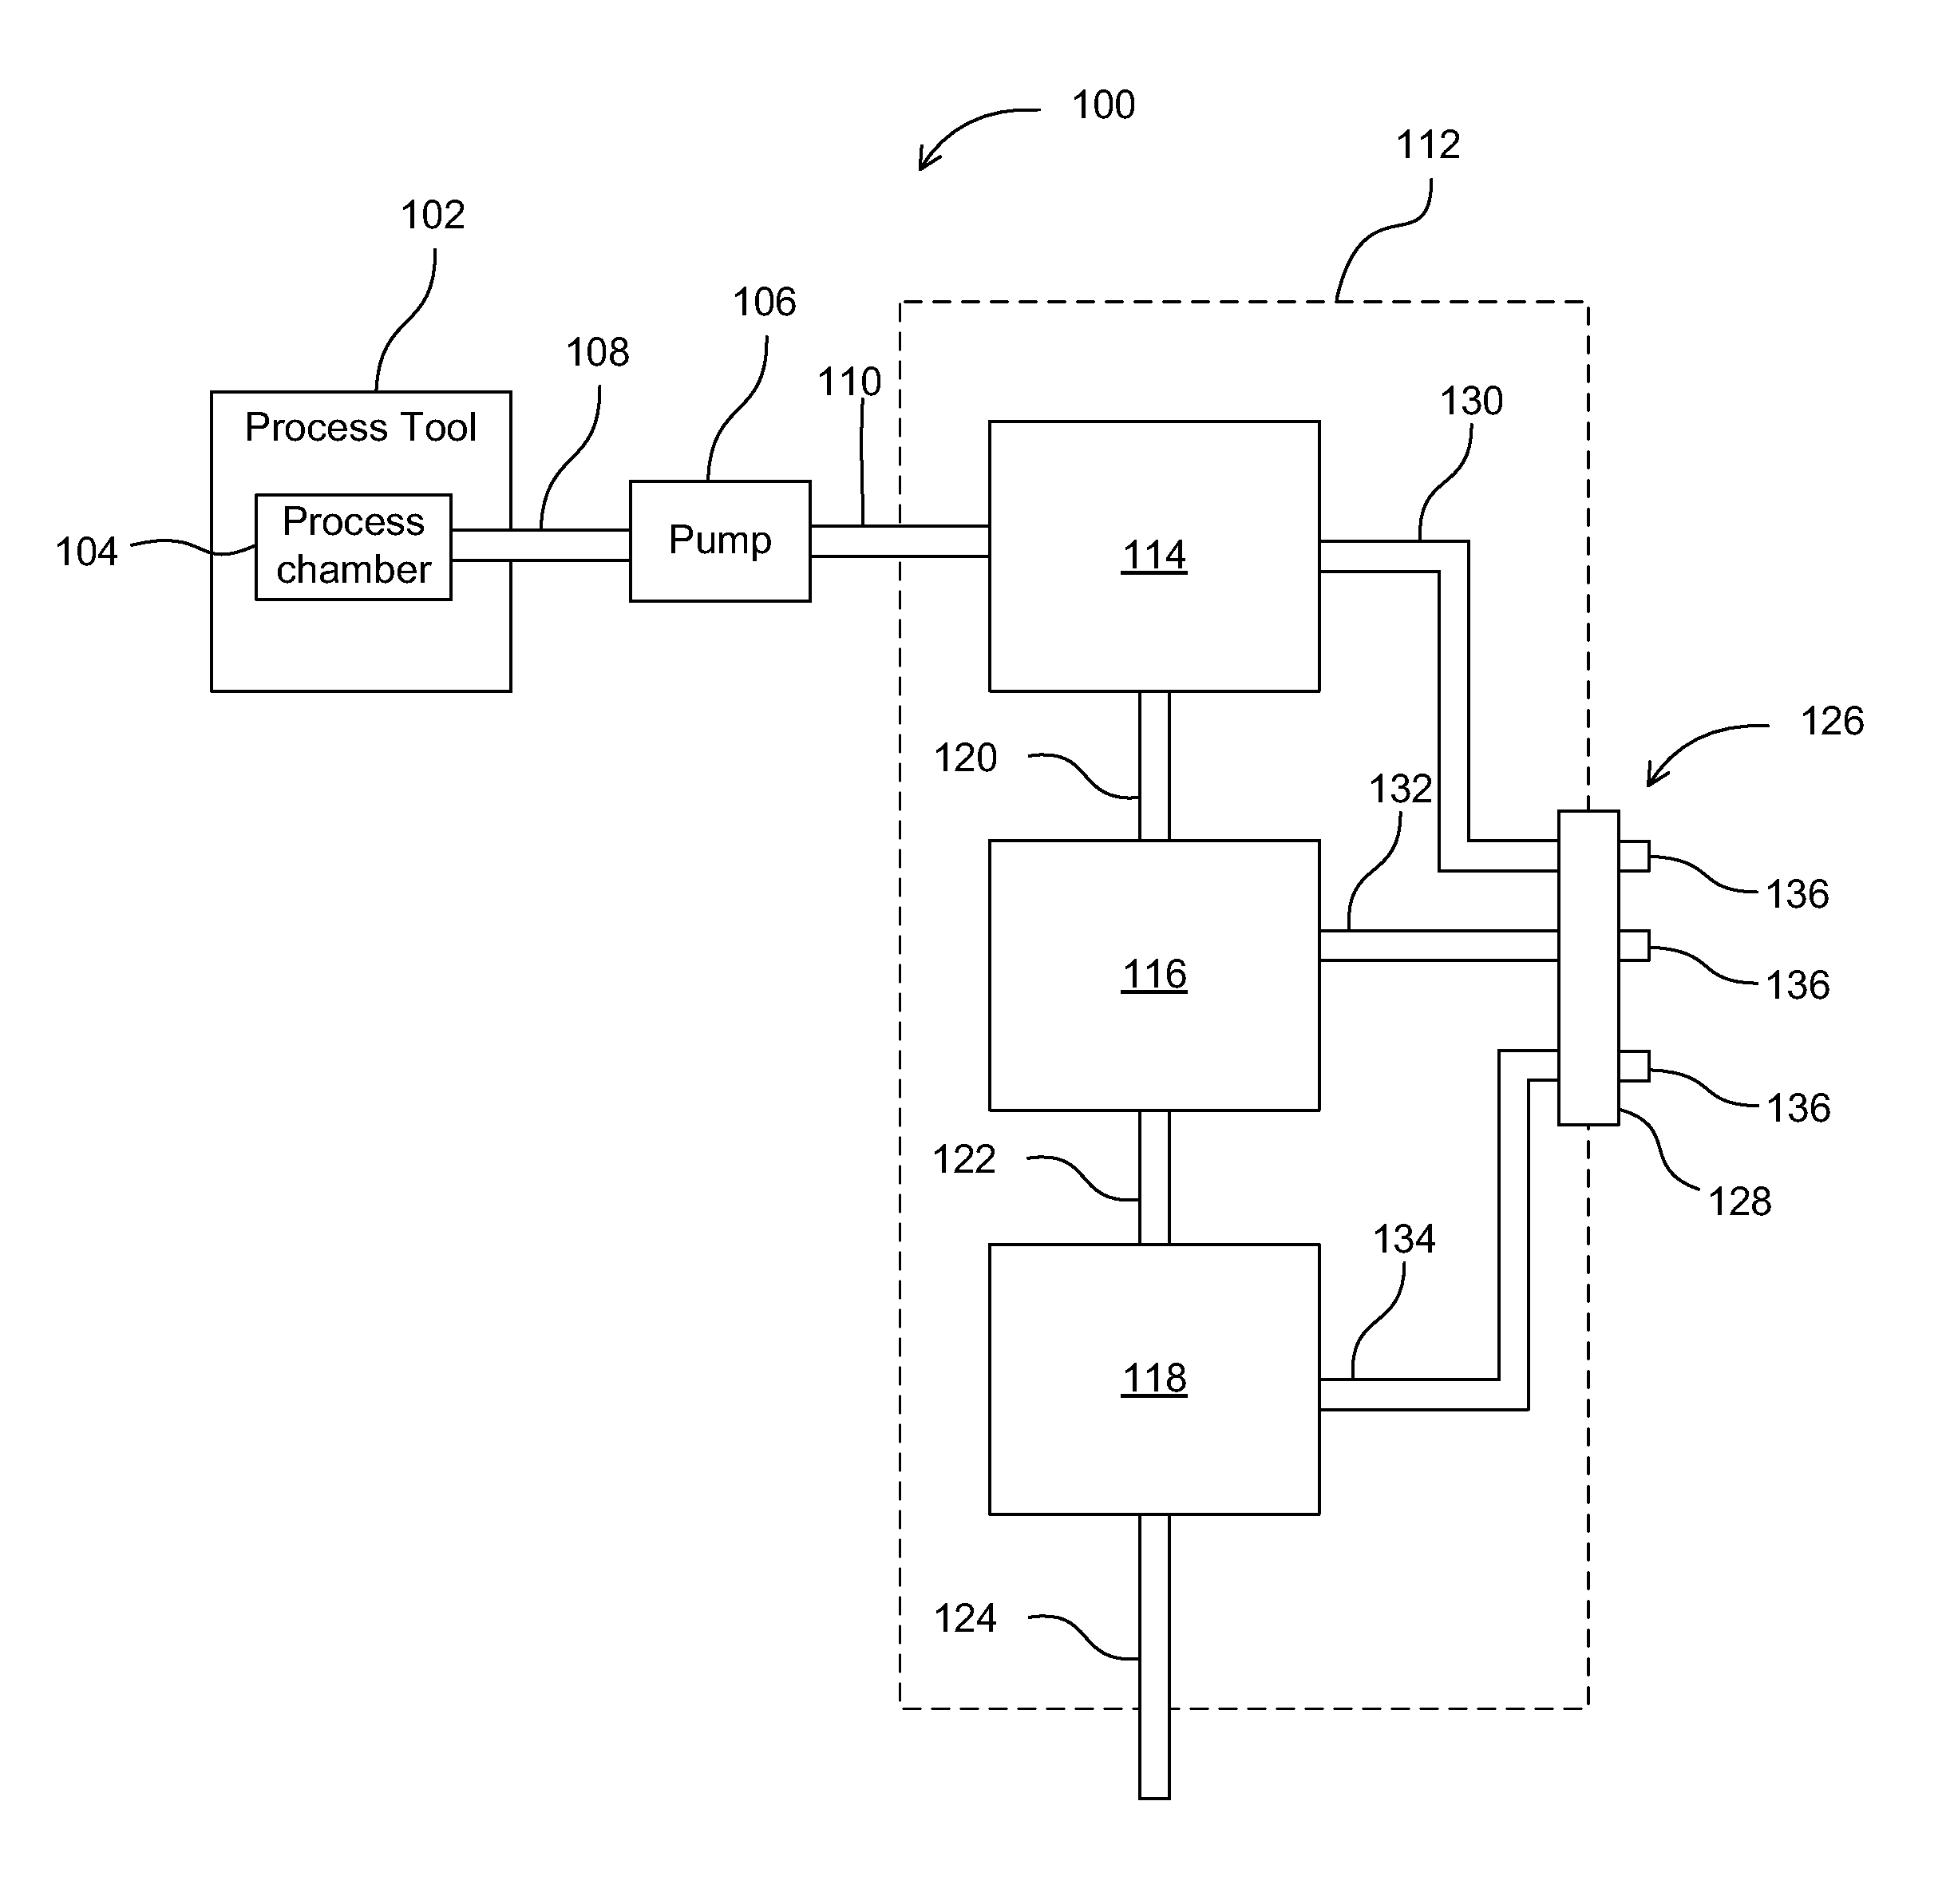 Methods and apparatus for assembling and operating electronic device manufacturing systems